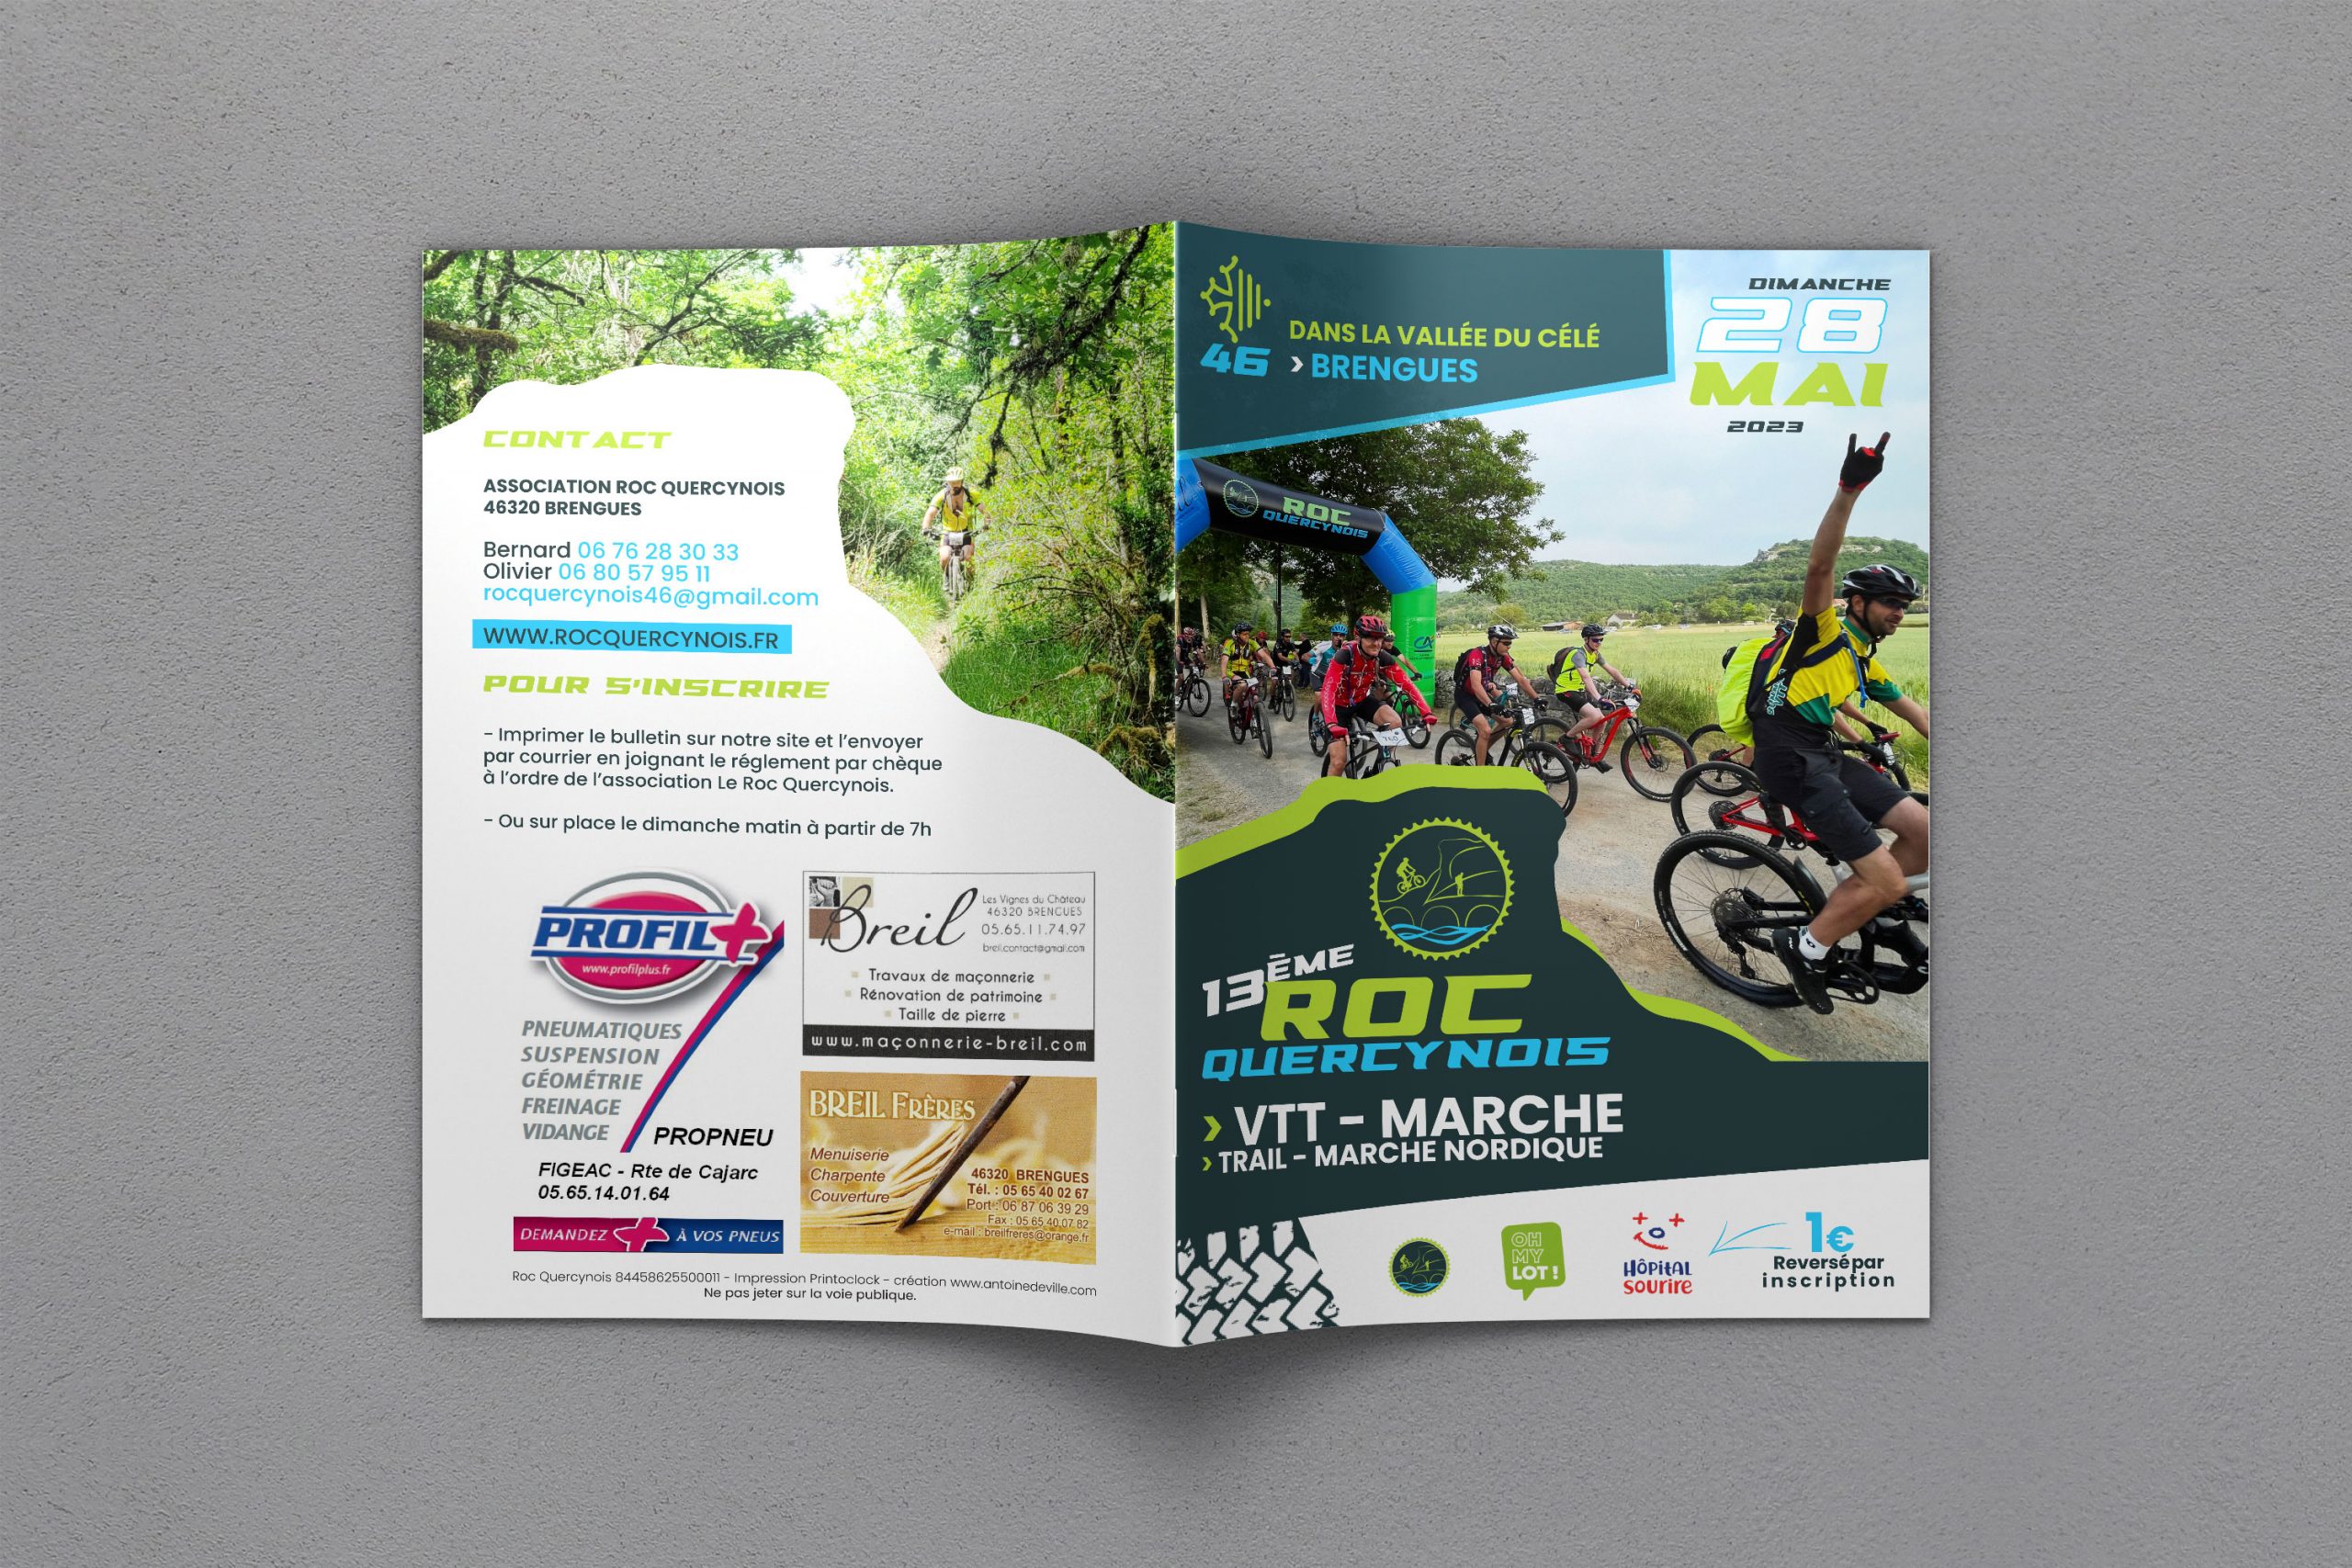 roc-quercynois-brochure